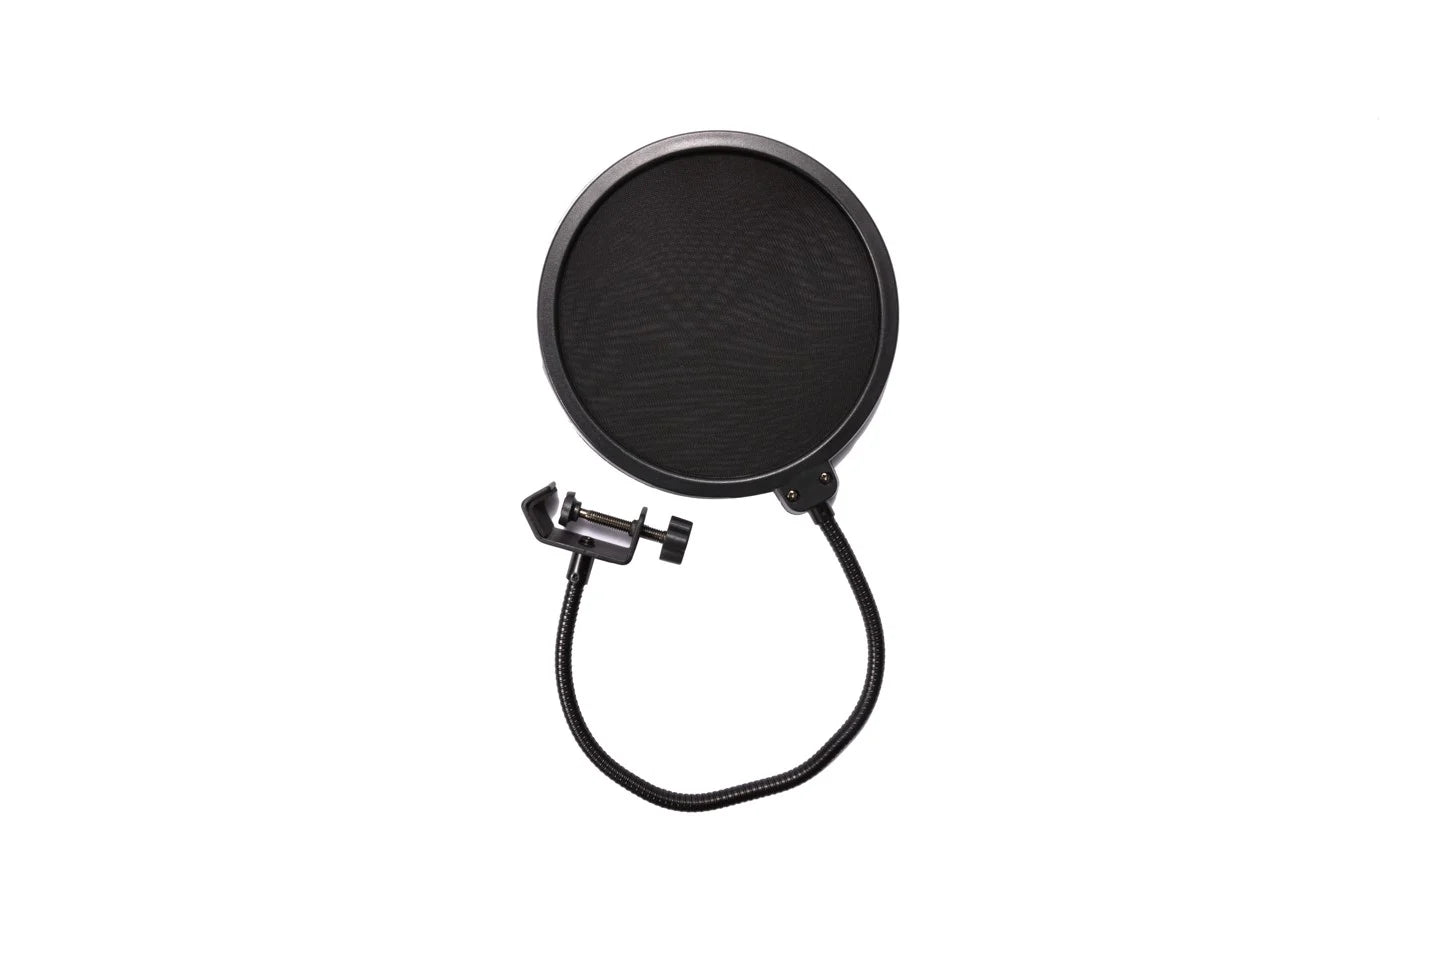 DON ONE - GMIC1000 Streaming Microphone Kit